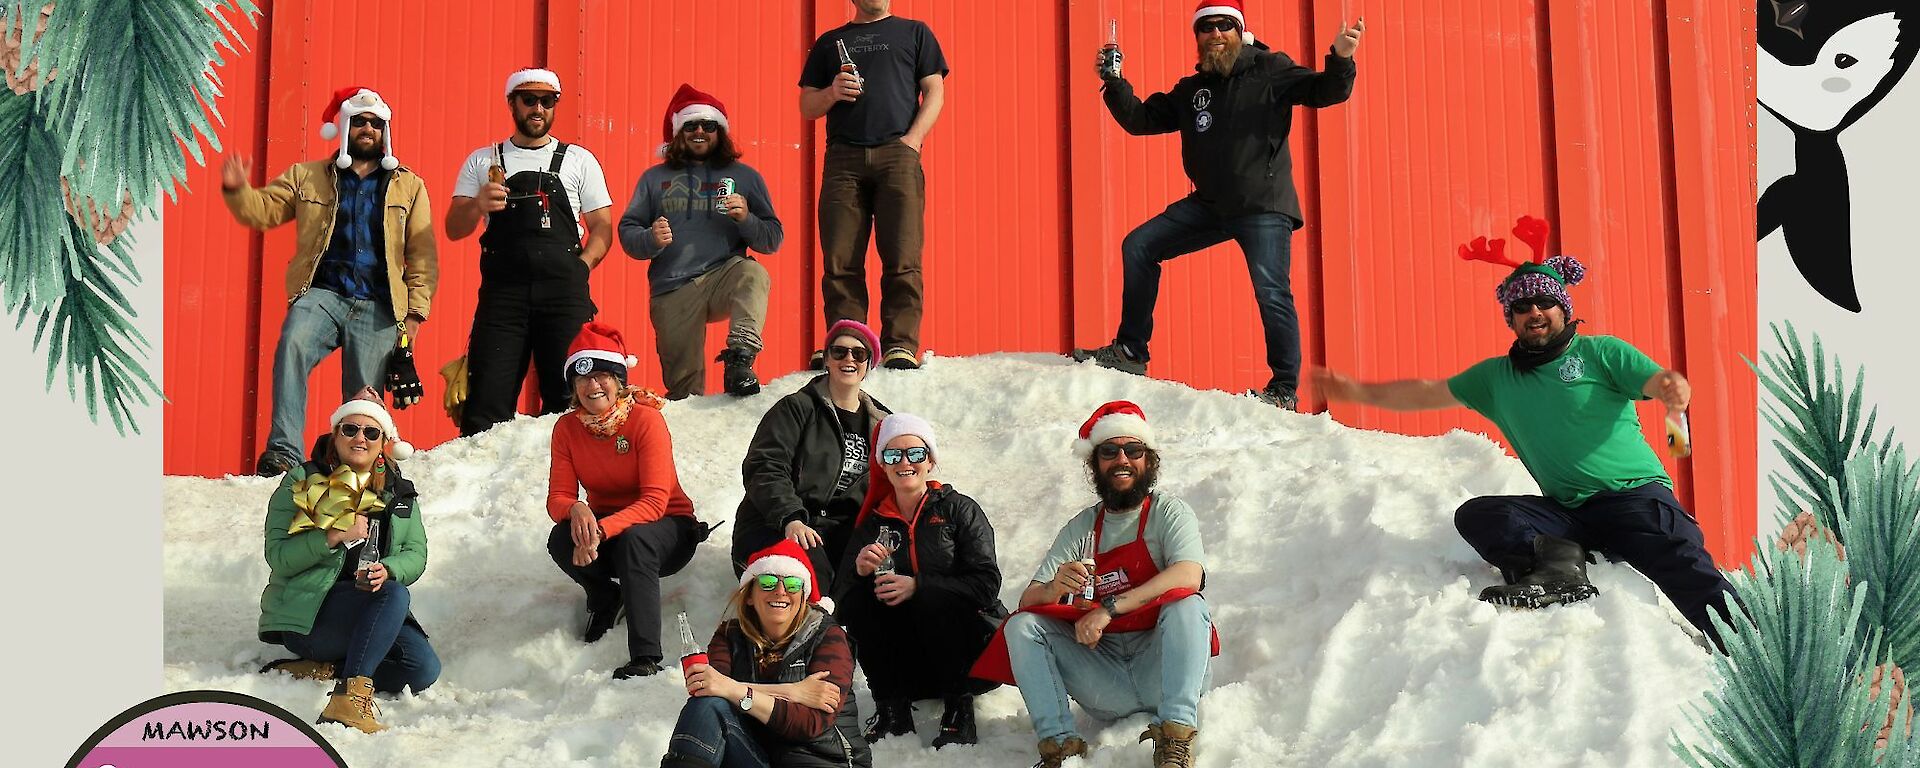 Small team on snow in front of red workshop building smiling at camera wearing Santa caps or reindeer horns, photo surrounded by Christmas message and Mawson crest